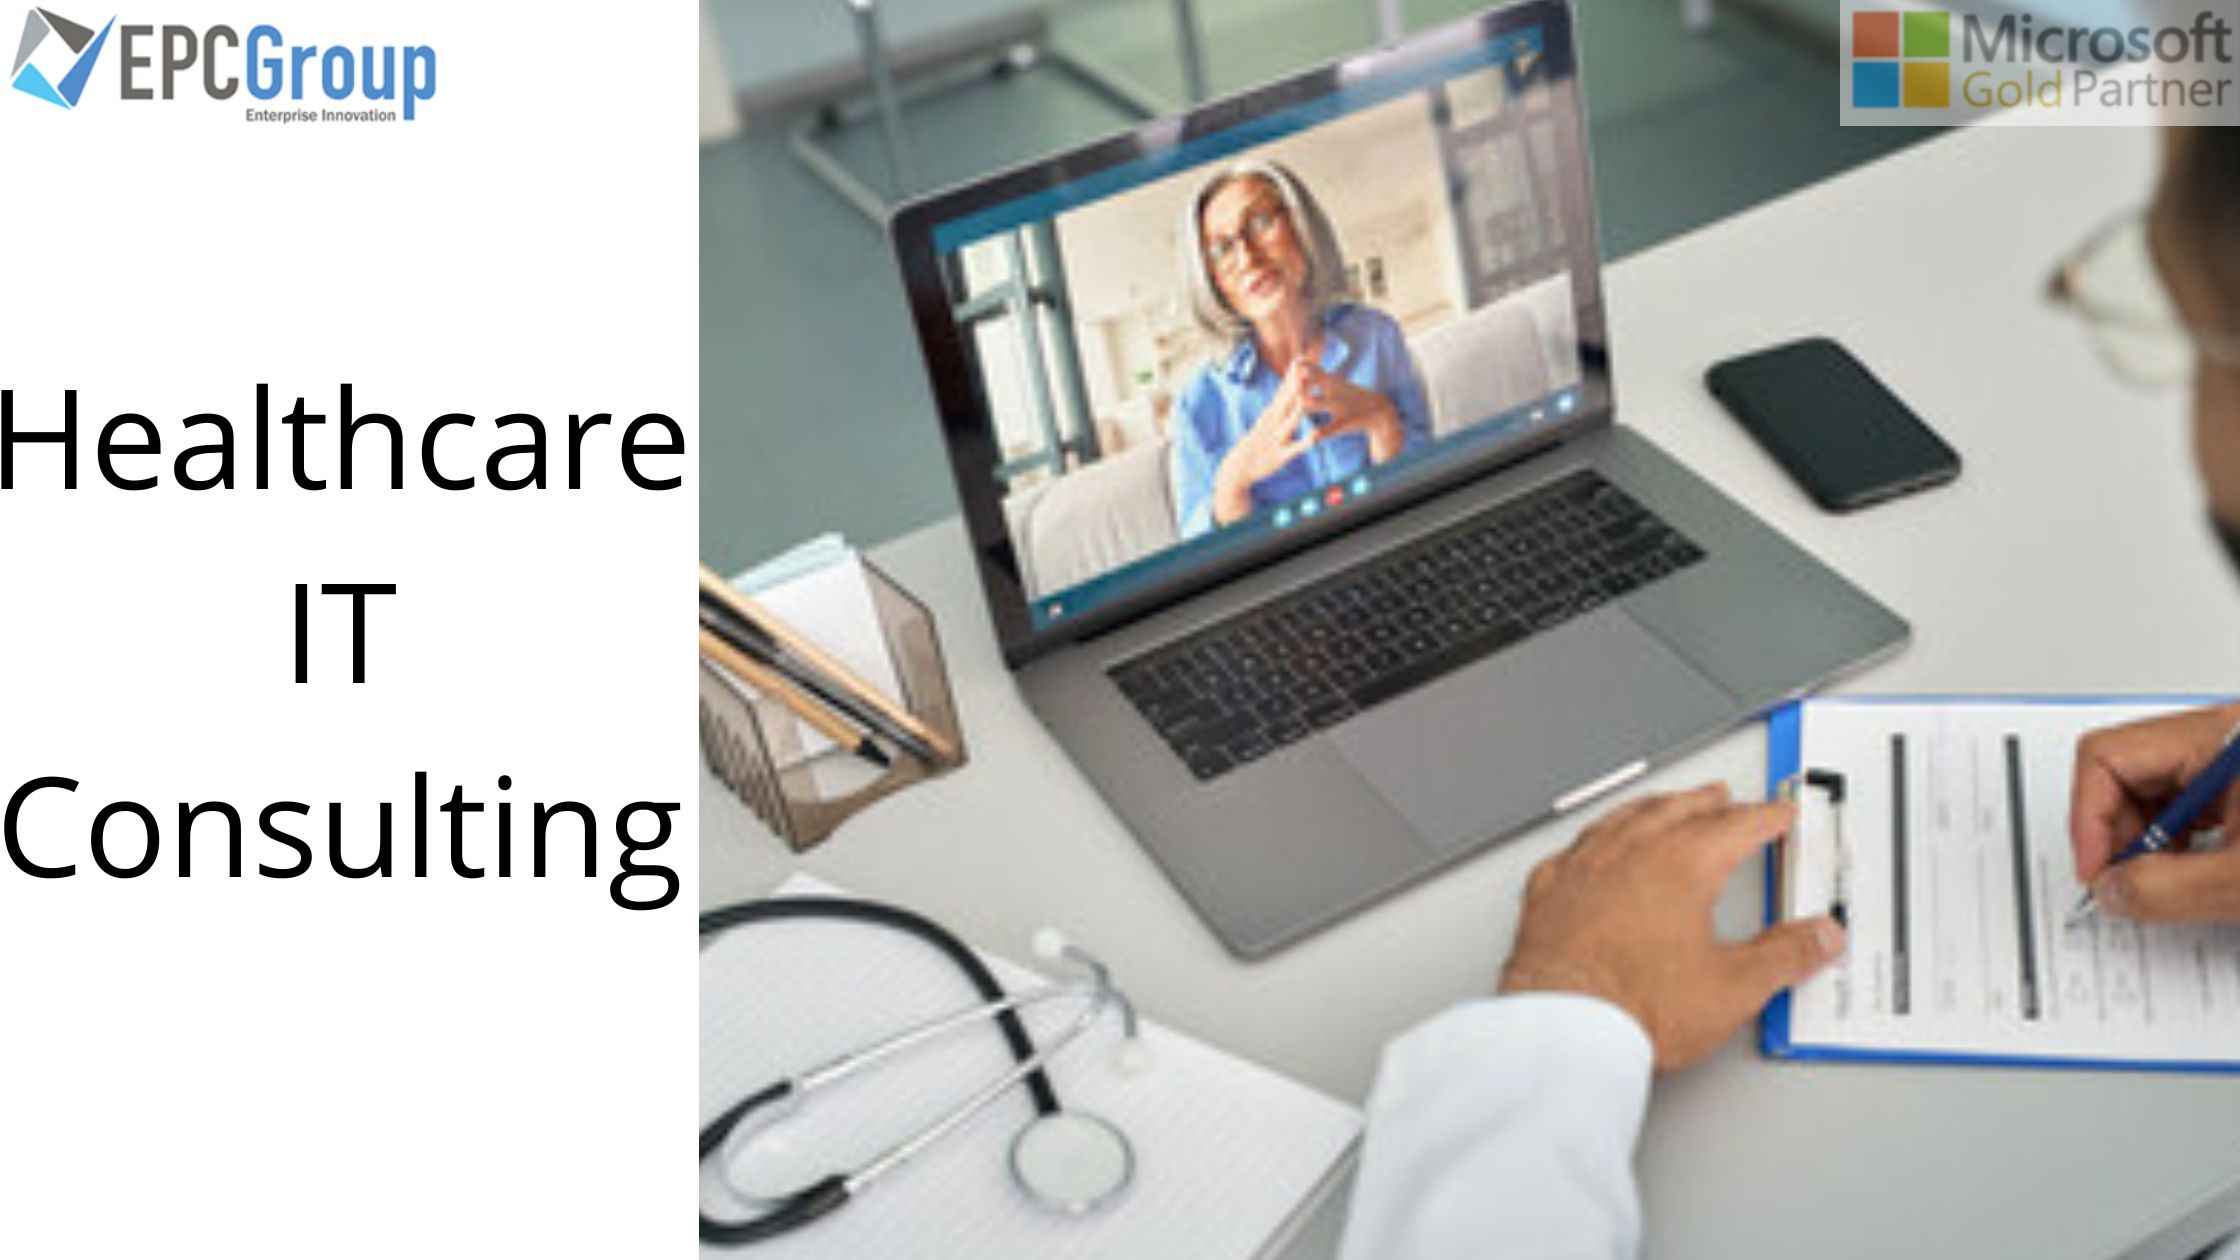 Healthcare IT Consulting for Hospitals and Healthcare Providers: Reducing Costs, Improving Patient Care